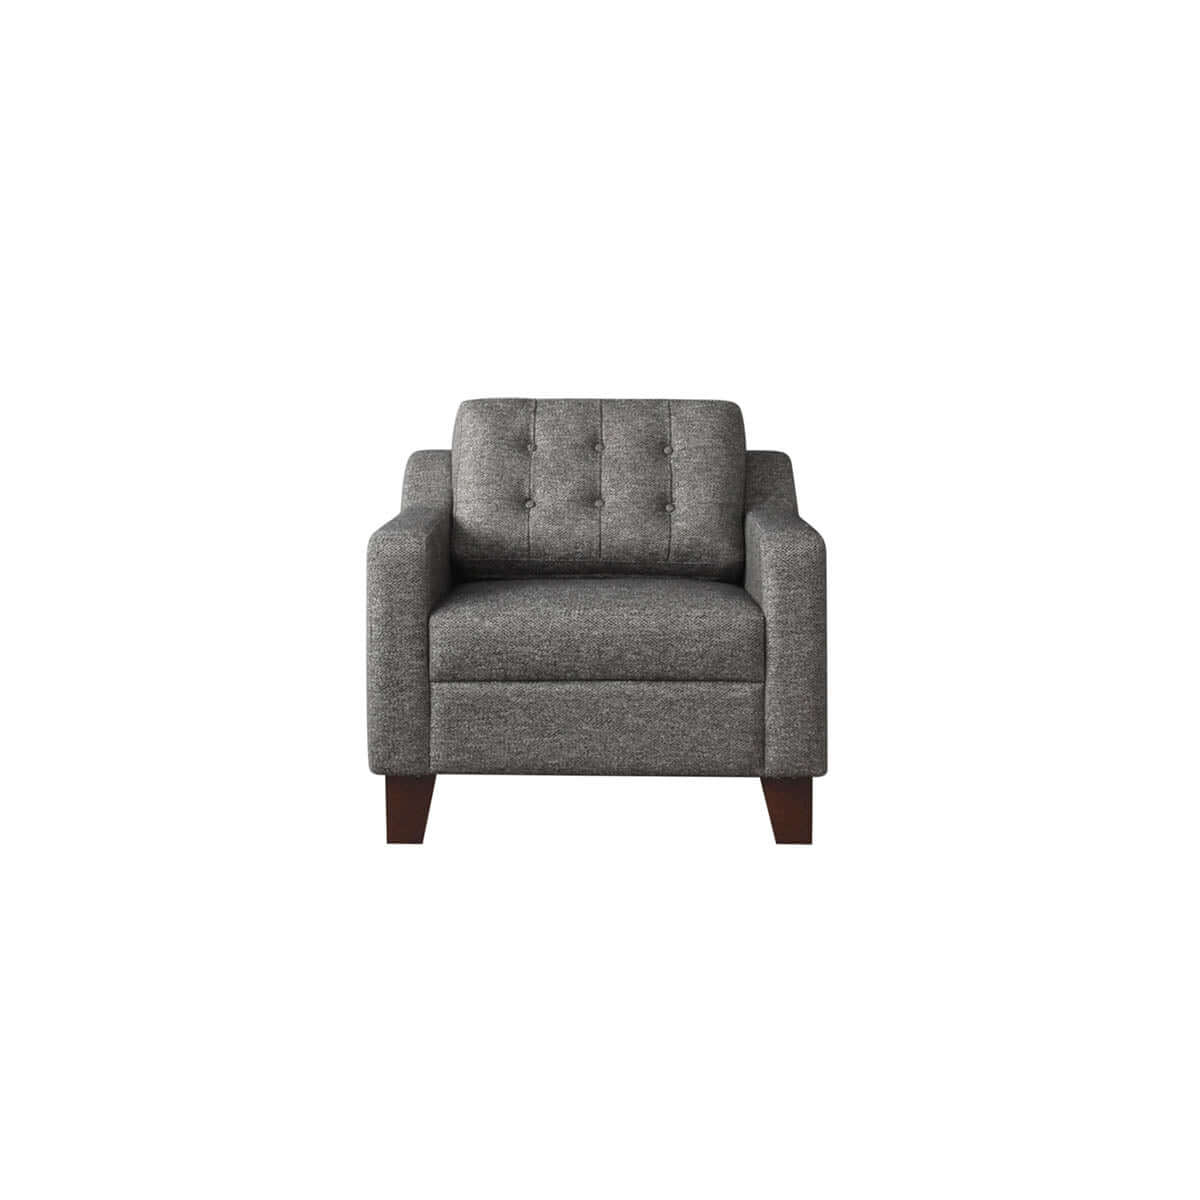 tufted one seat sofa with a modern design